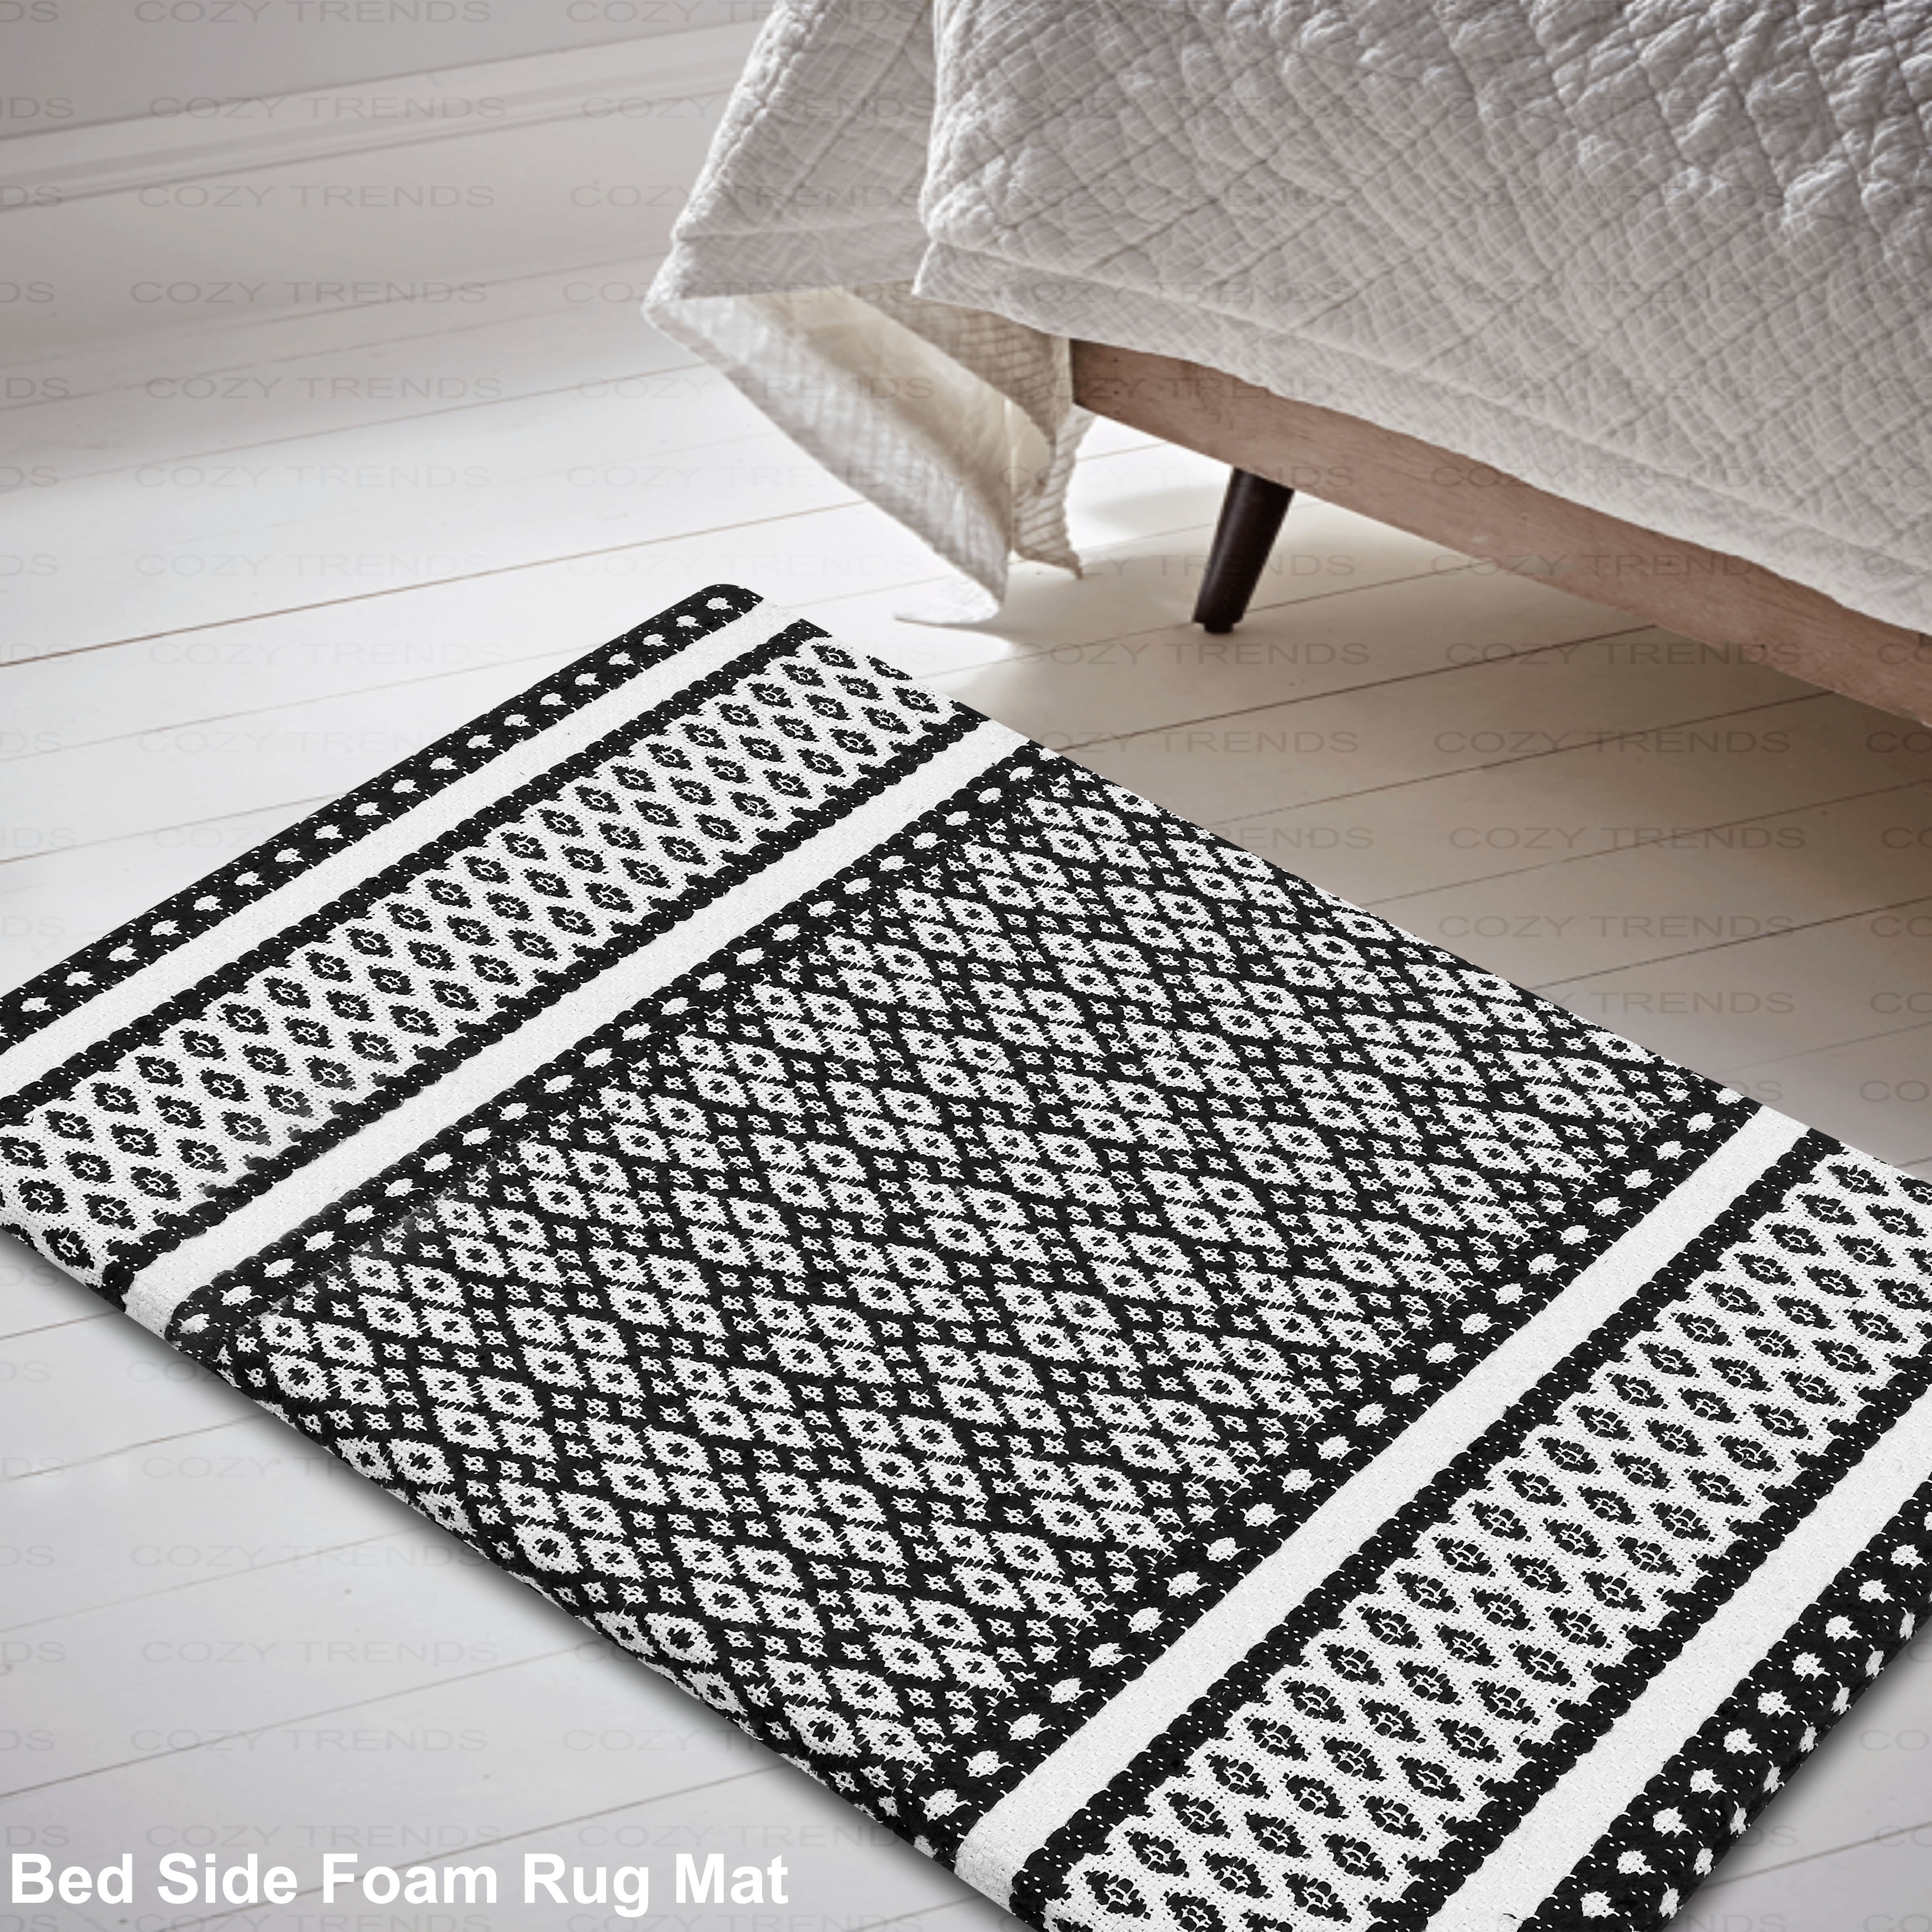 https://ak1.ostkcdn.com/images/products/is/images/direct/29887878469e5684b009b7ac6bf30b6f97485f75/Cotton-Kitchen-Mat-Cushioned-Anti-Fatigue-Rug%2C-Non-Slip-Mats-Comfort-Foam-Rug-for-Kitchen%2C-Office%2C-Sink%2C-Laundry---18%27%27x30%27%27.jpg